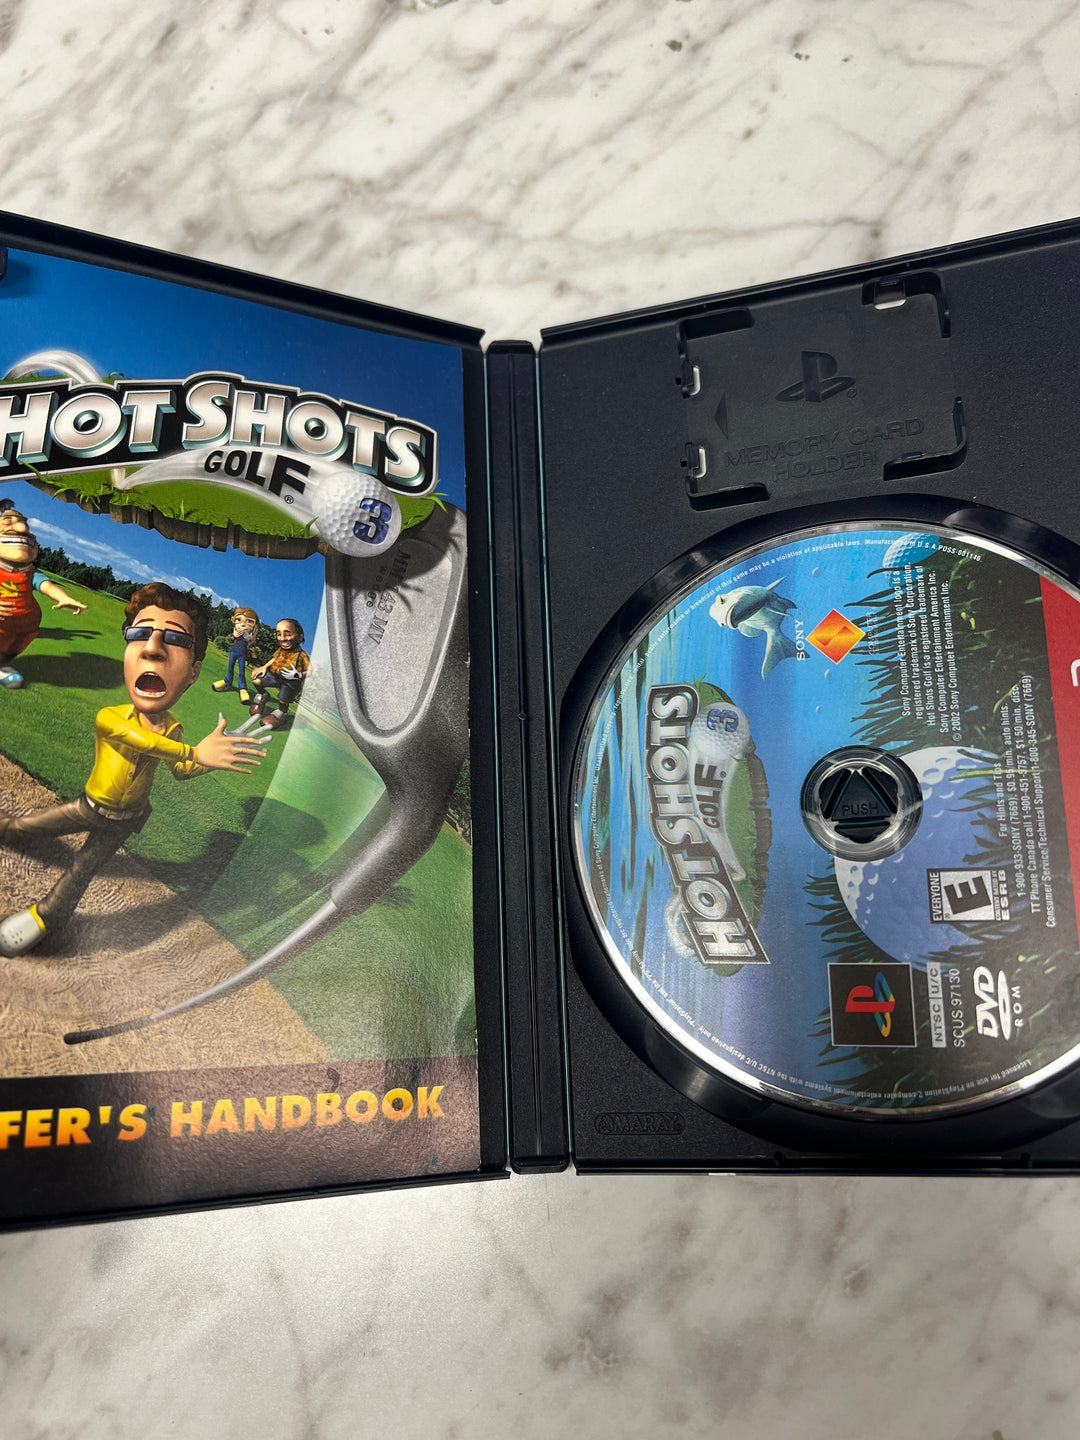 Hot Shots Golf 3 for Playstation 2 PS2 in case. Tested and Working.     DO63024